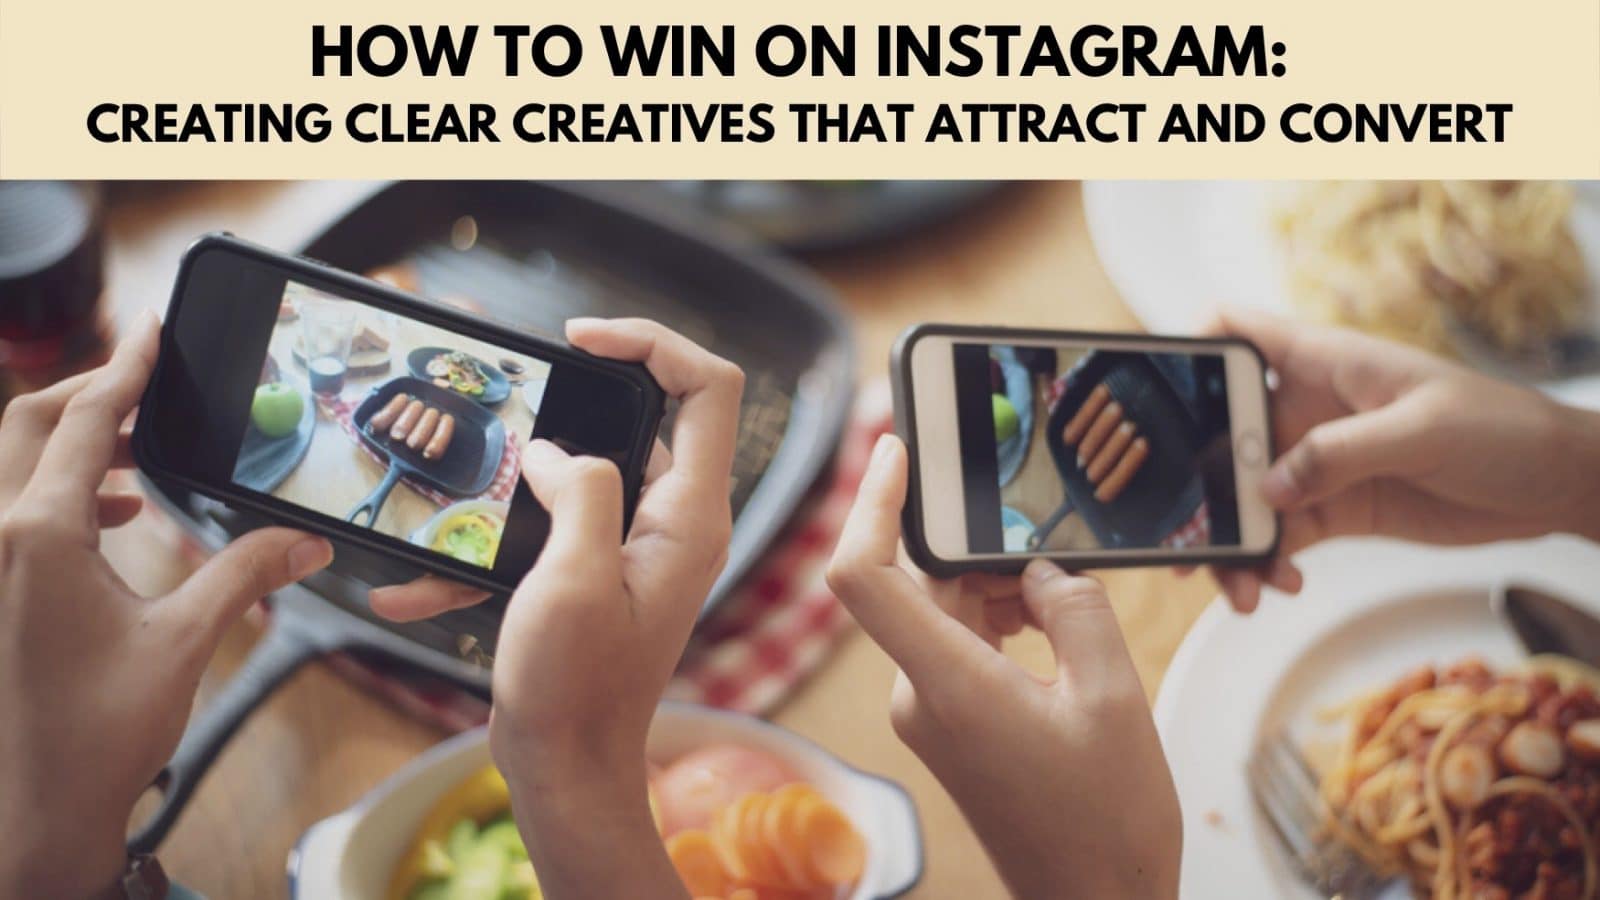 How to Win on Instagram: Creating Clear Creatives that Attract and Convert